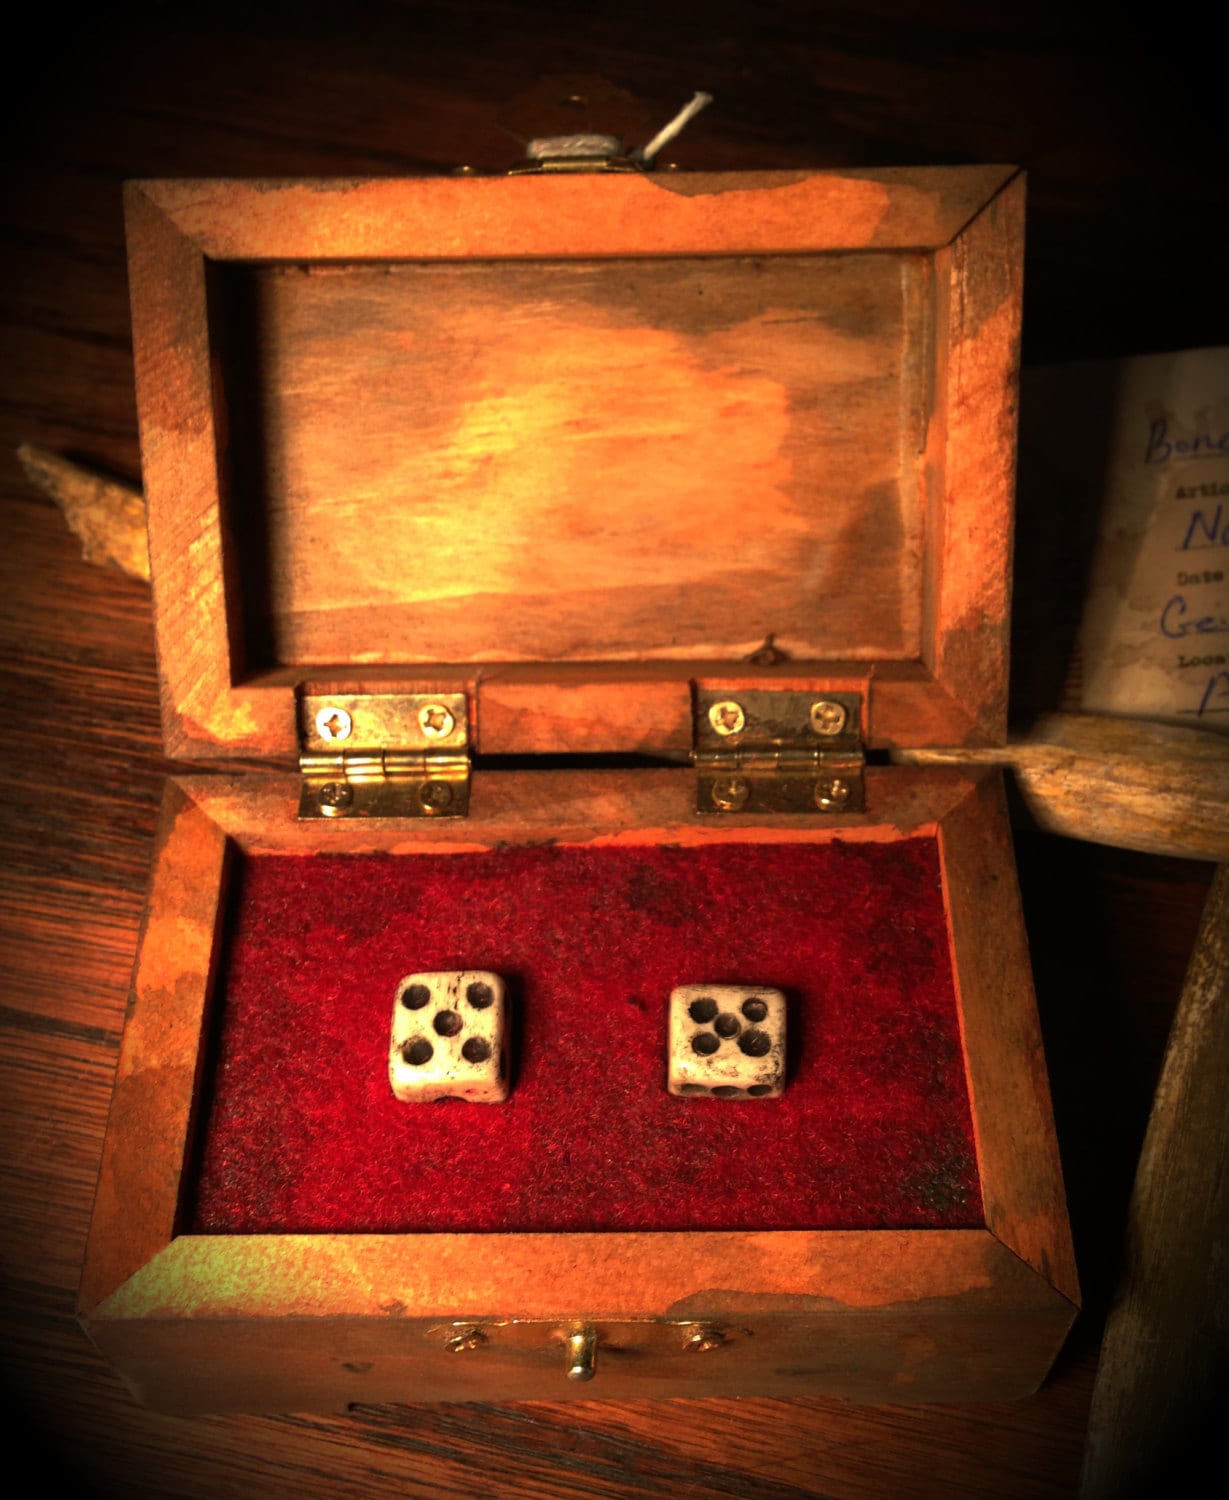 Dice Made of Human Bone found in the home of Ed Gein